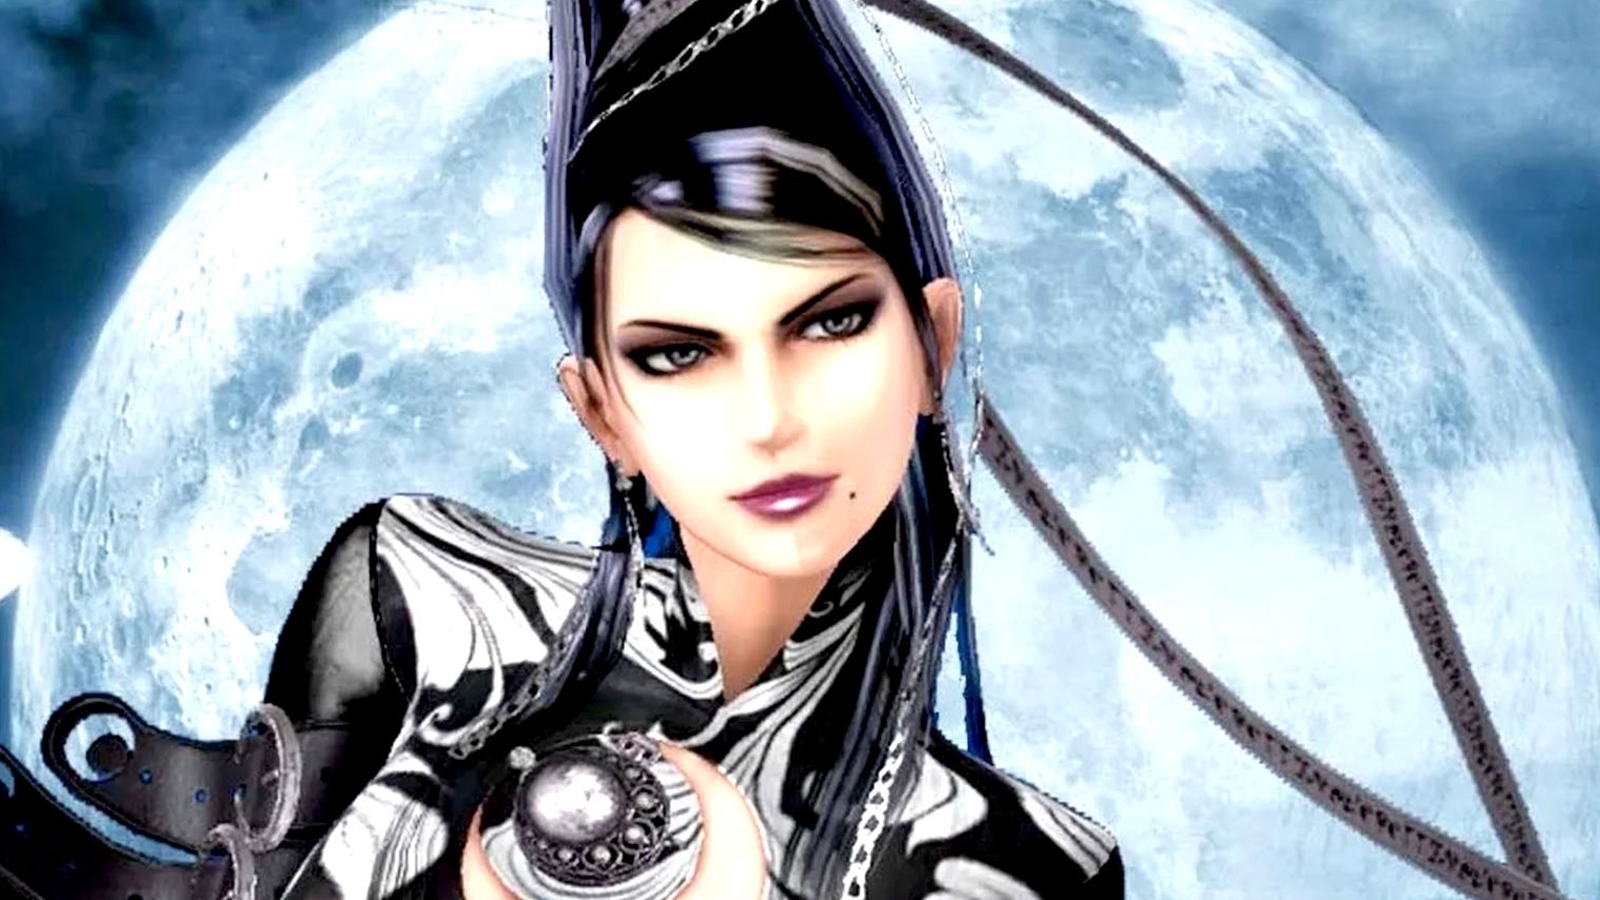 It looks like 'Bayonetta' and 'Vanquish' 4K remasters are coming to Xbox One